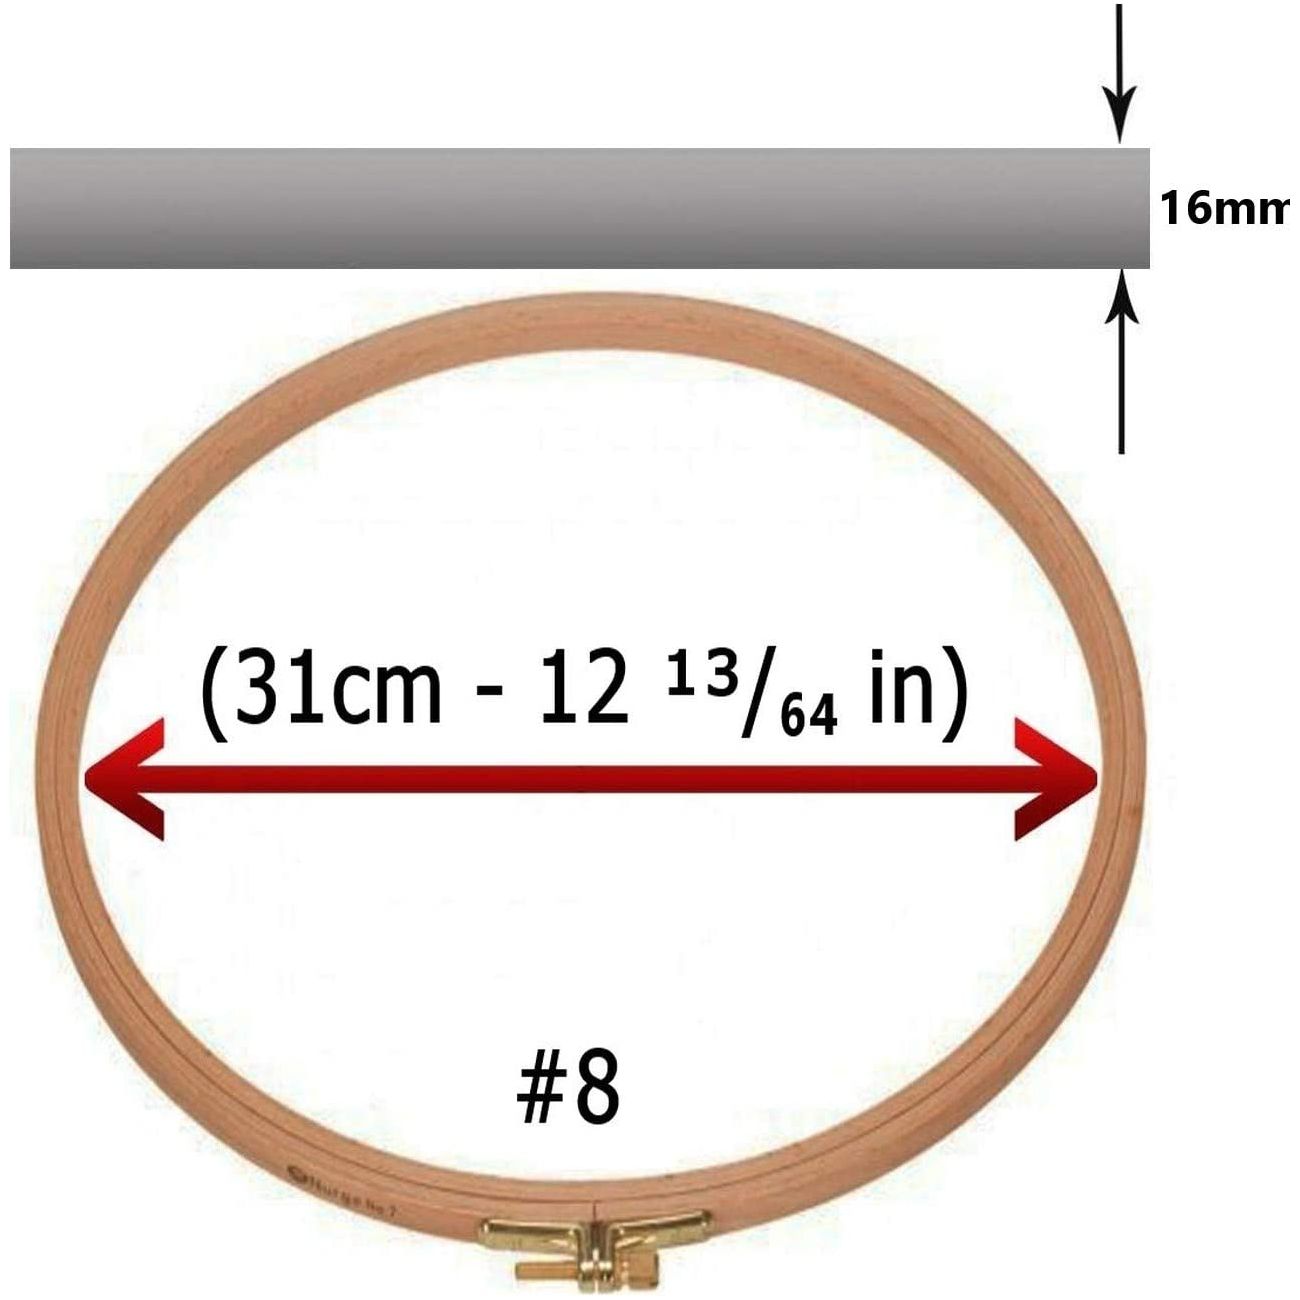 natural beech wood round quilt 16mm embroidery hoop 31cm - 12 ¹³/₆₄ in